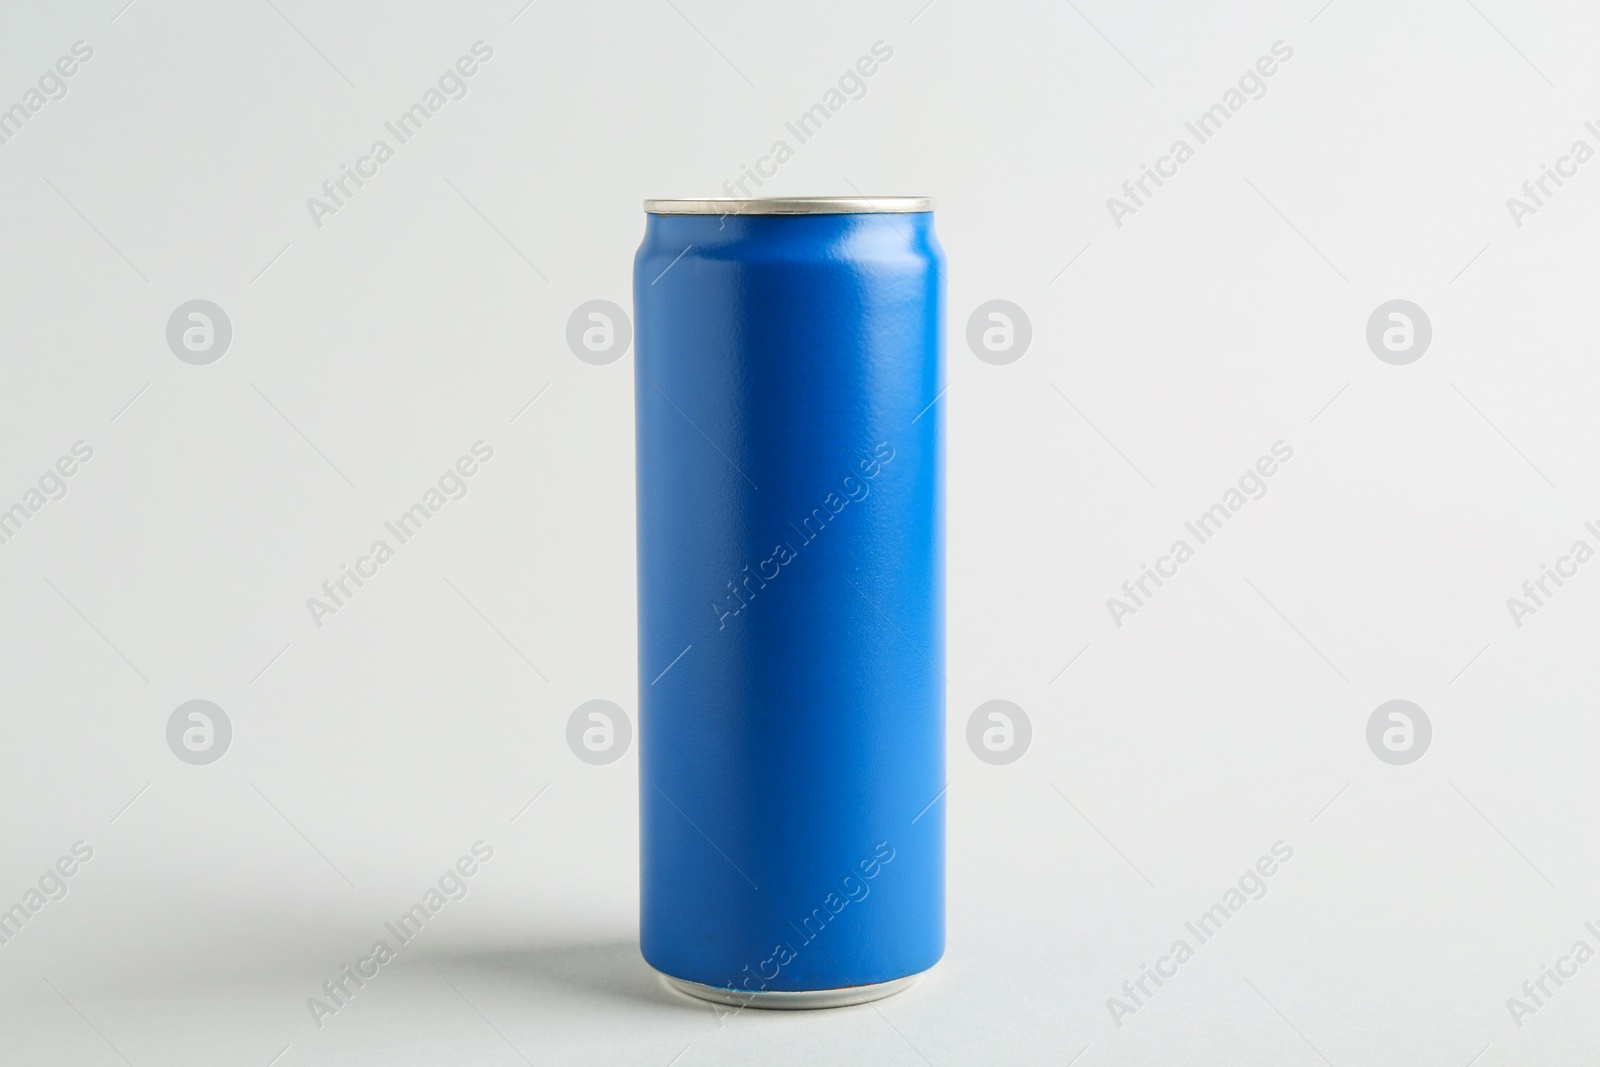 Photo of Energy drink in blue can on light grey background